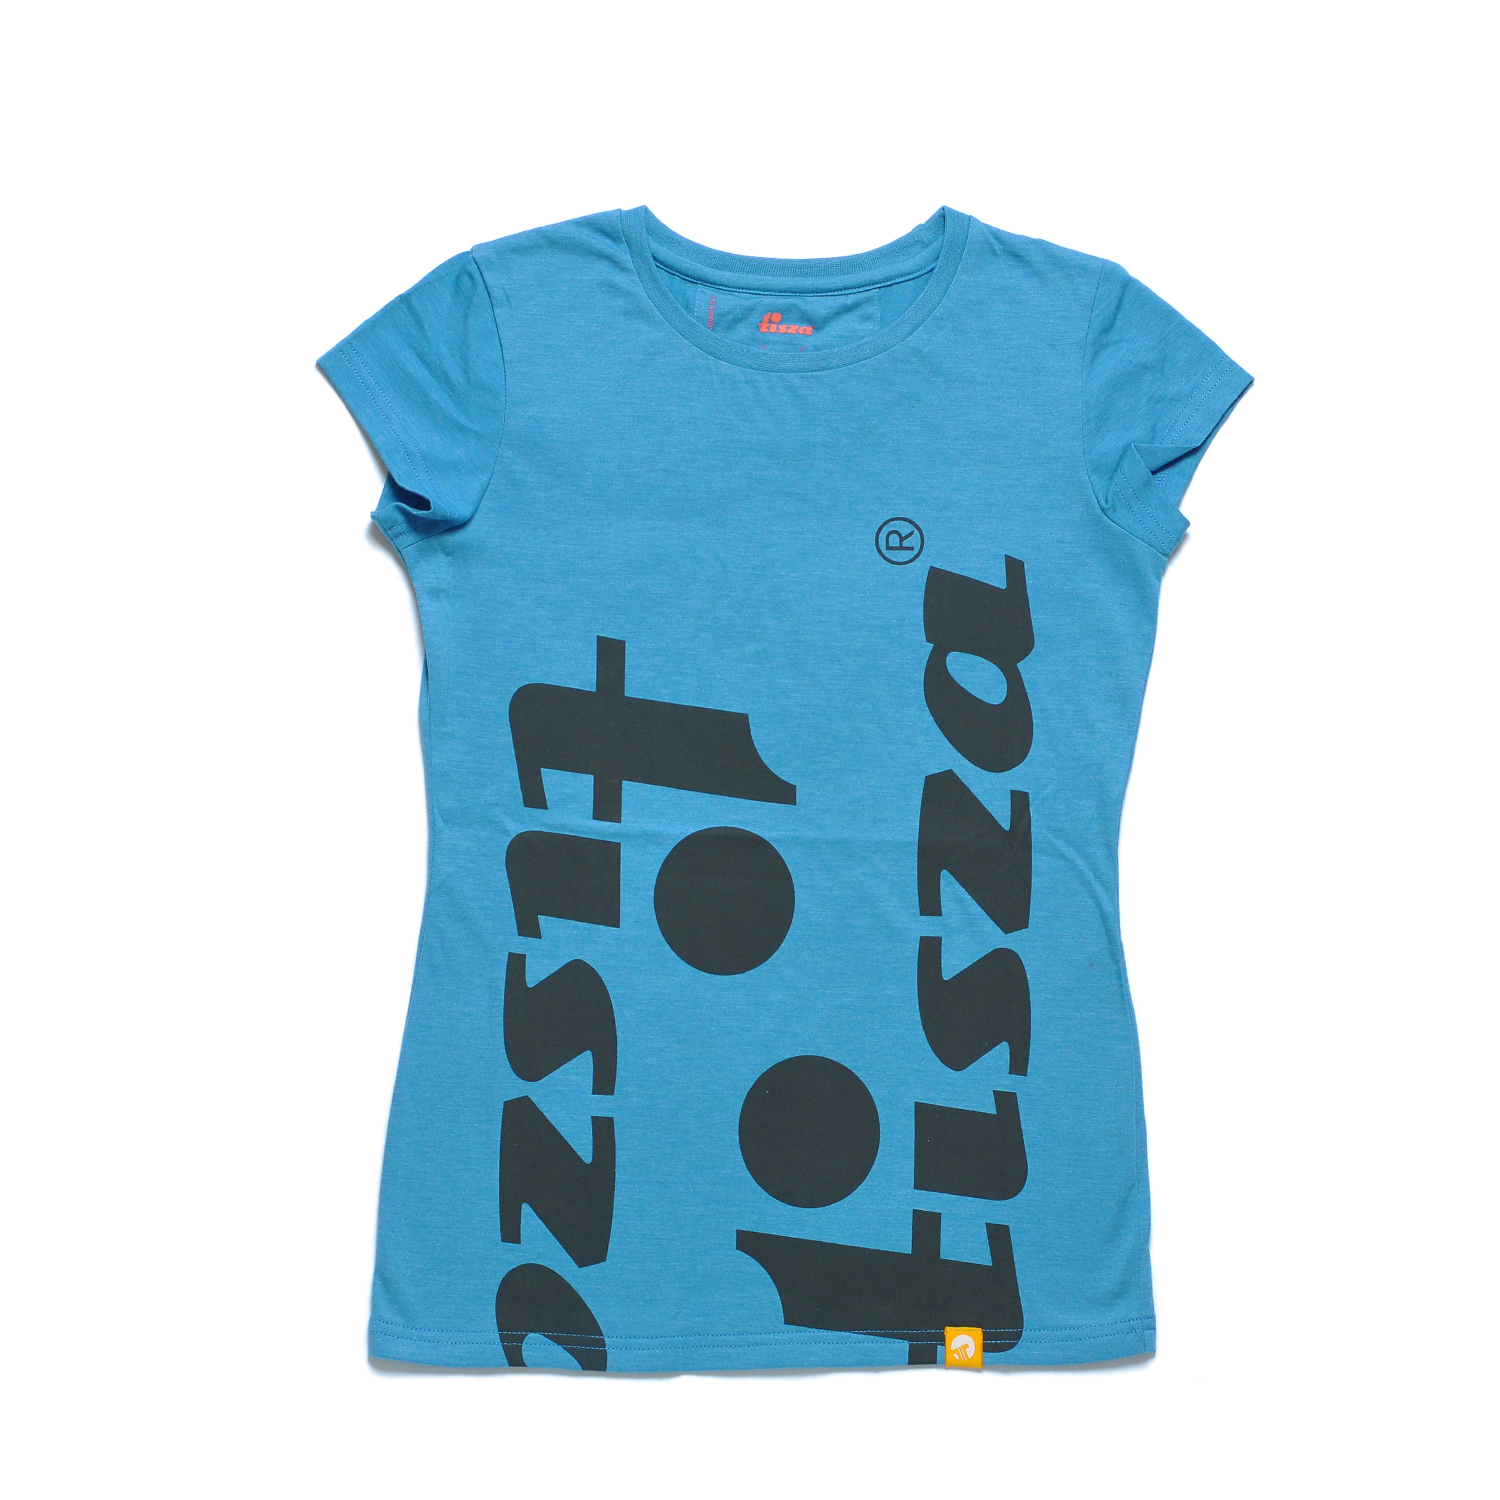 Tisza shoes - Woment T-shirt - Turquoise-idol